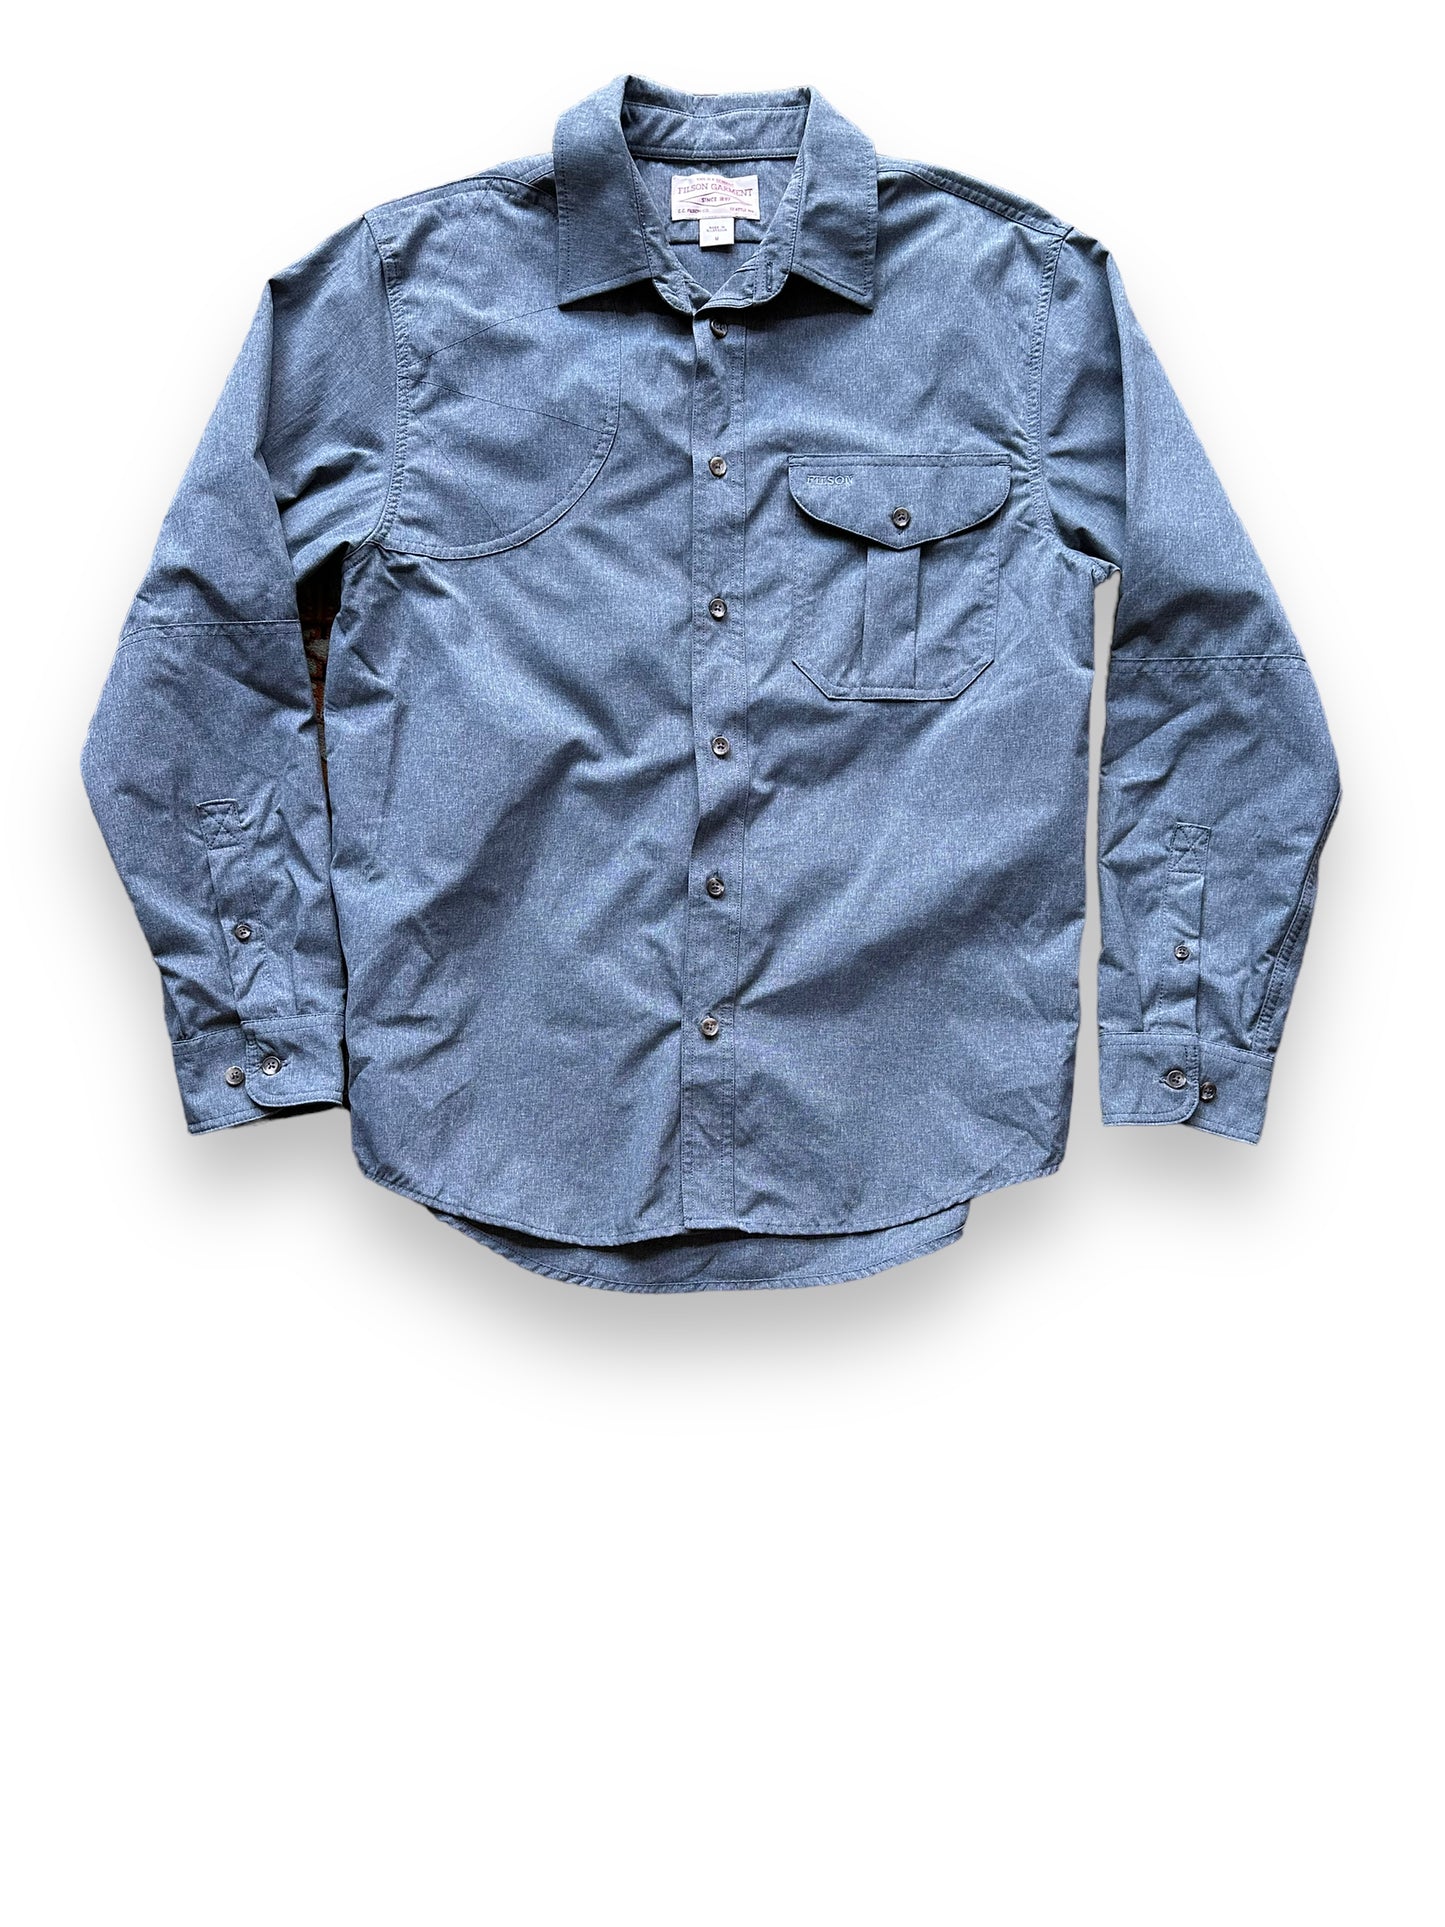 Front View of Filson Carbon Blue Right Handed Shooting Shirt SZ M |  Barn Owl Vintage Goods | Vintage Filson Workwear Seattle